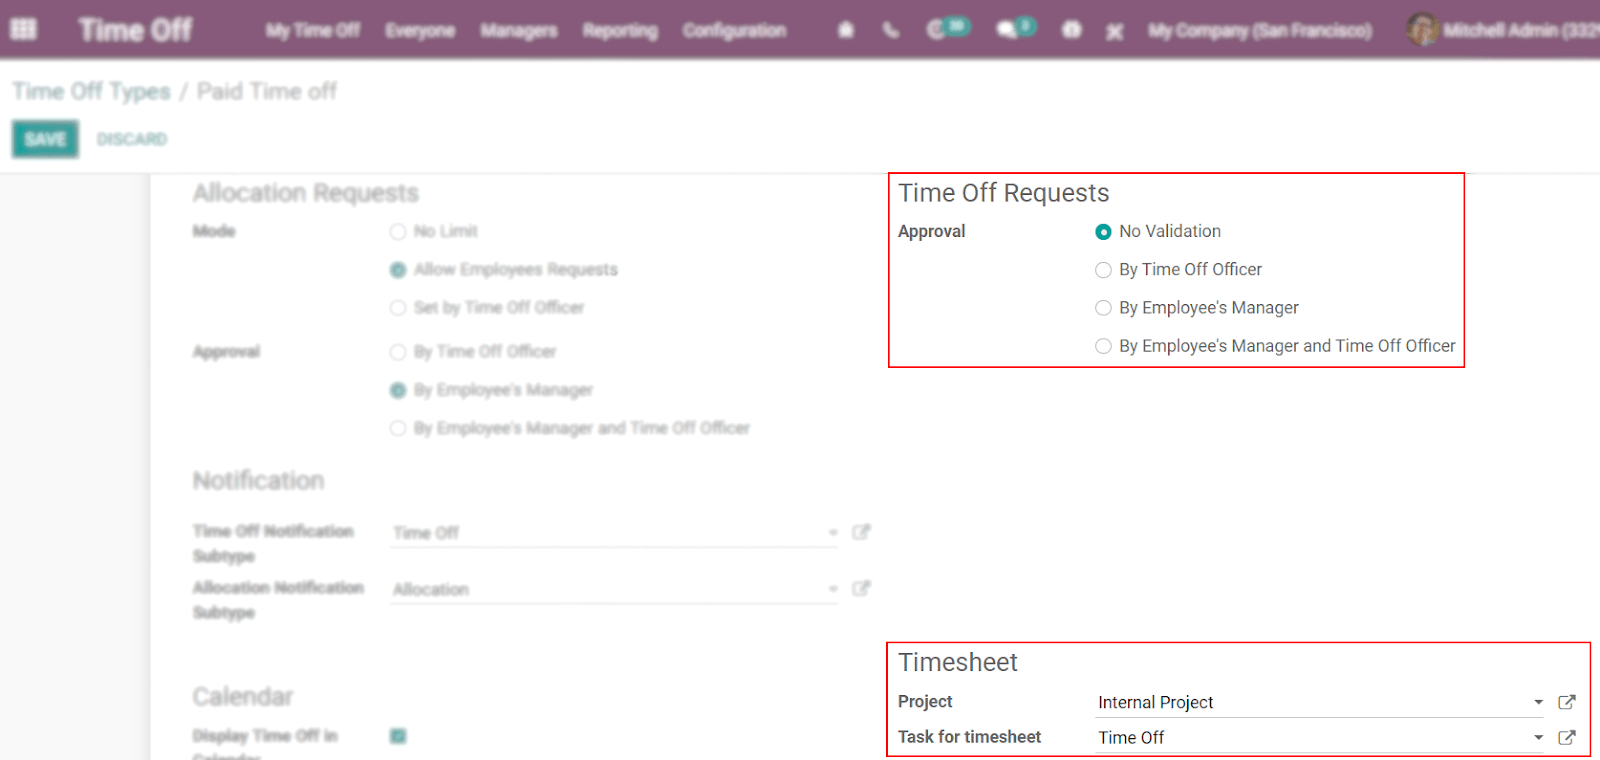 View of a time off types form emphasizing the time off requests and timesheets section in CoquiAPPs Time Off